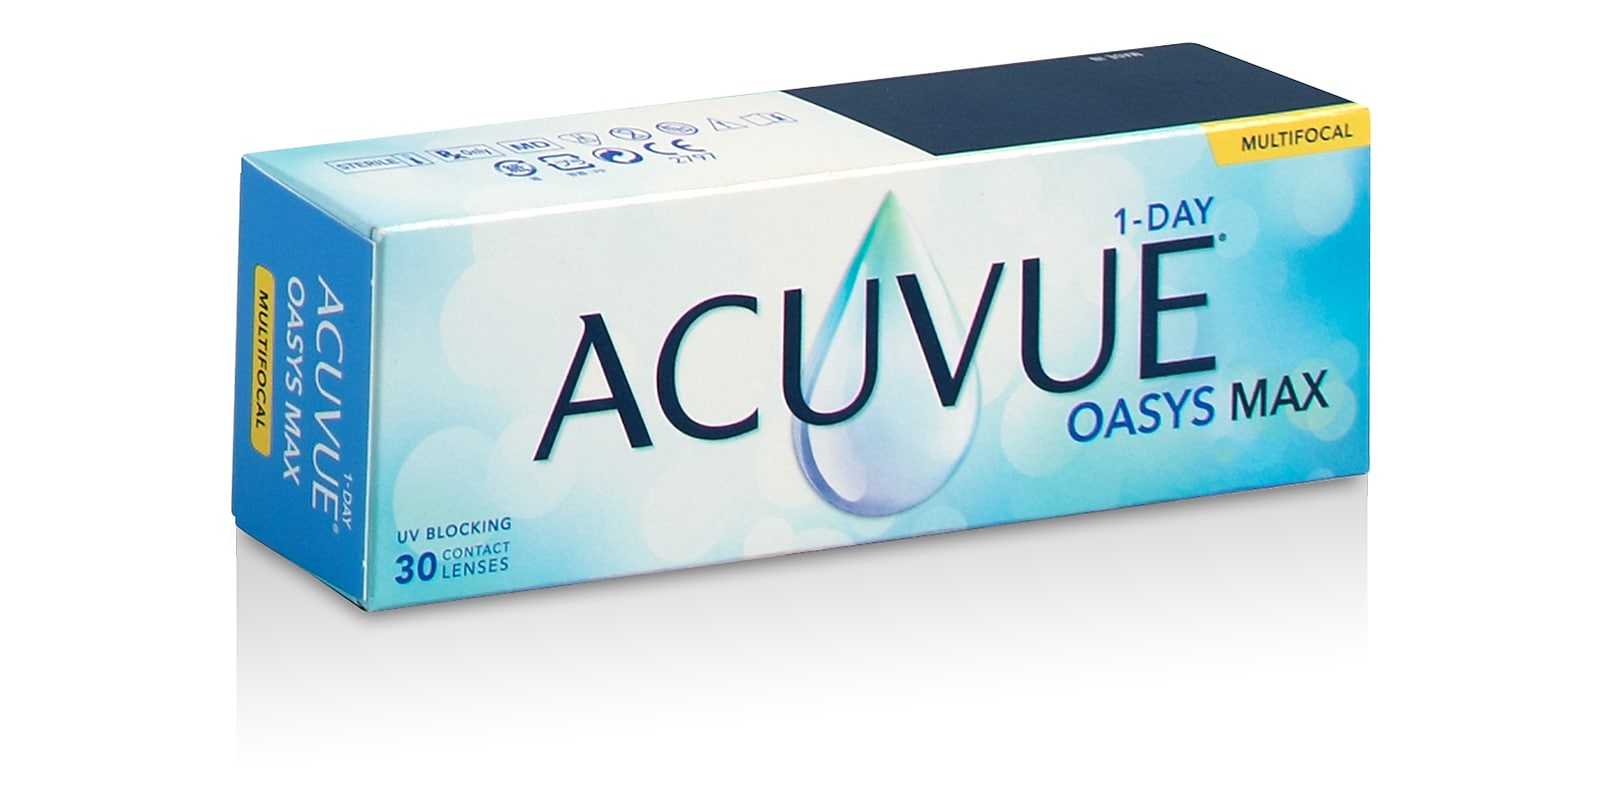 Johnson & Johnson - Acuvue® Oasys Max 1-day Multifocal, 30 Pack